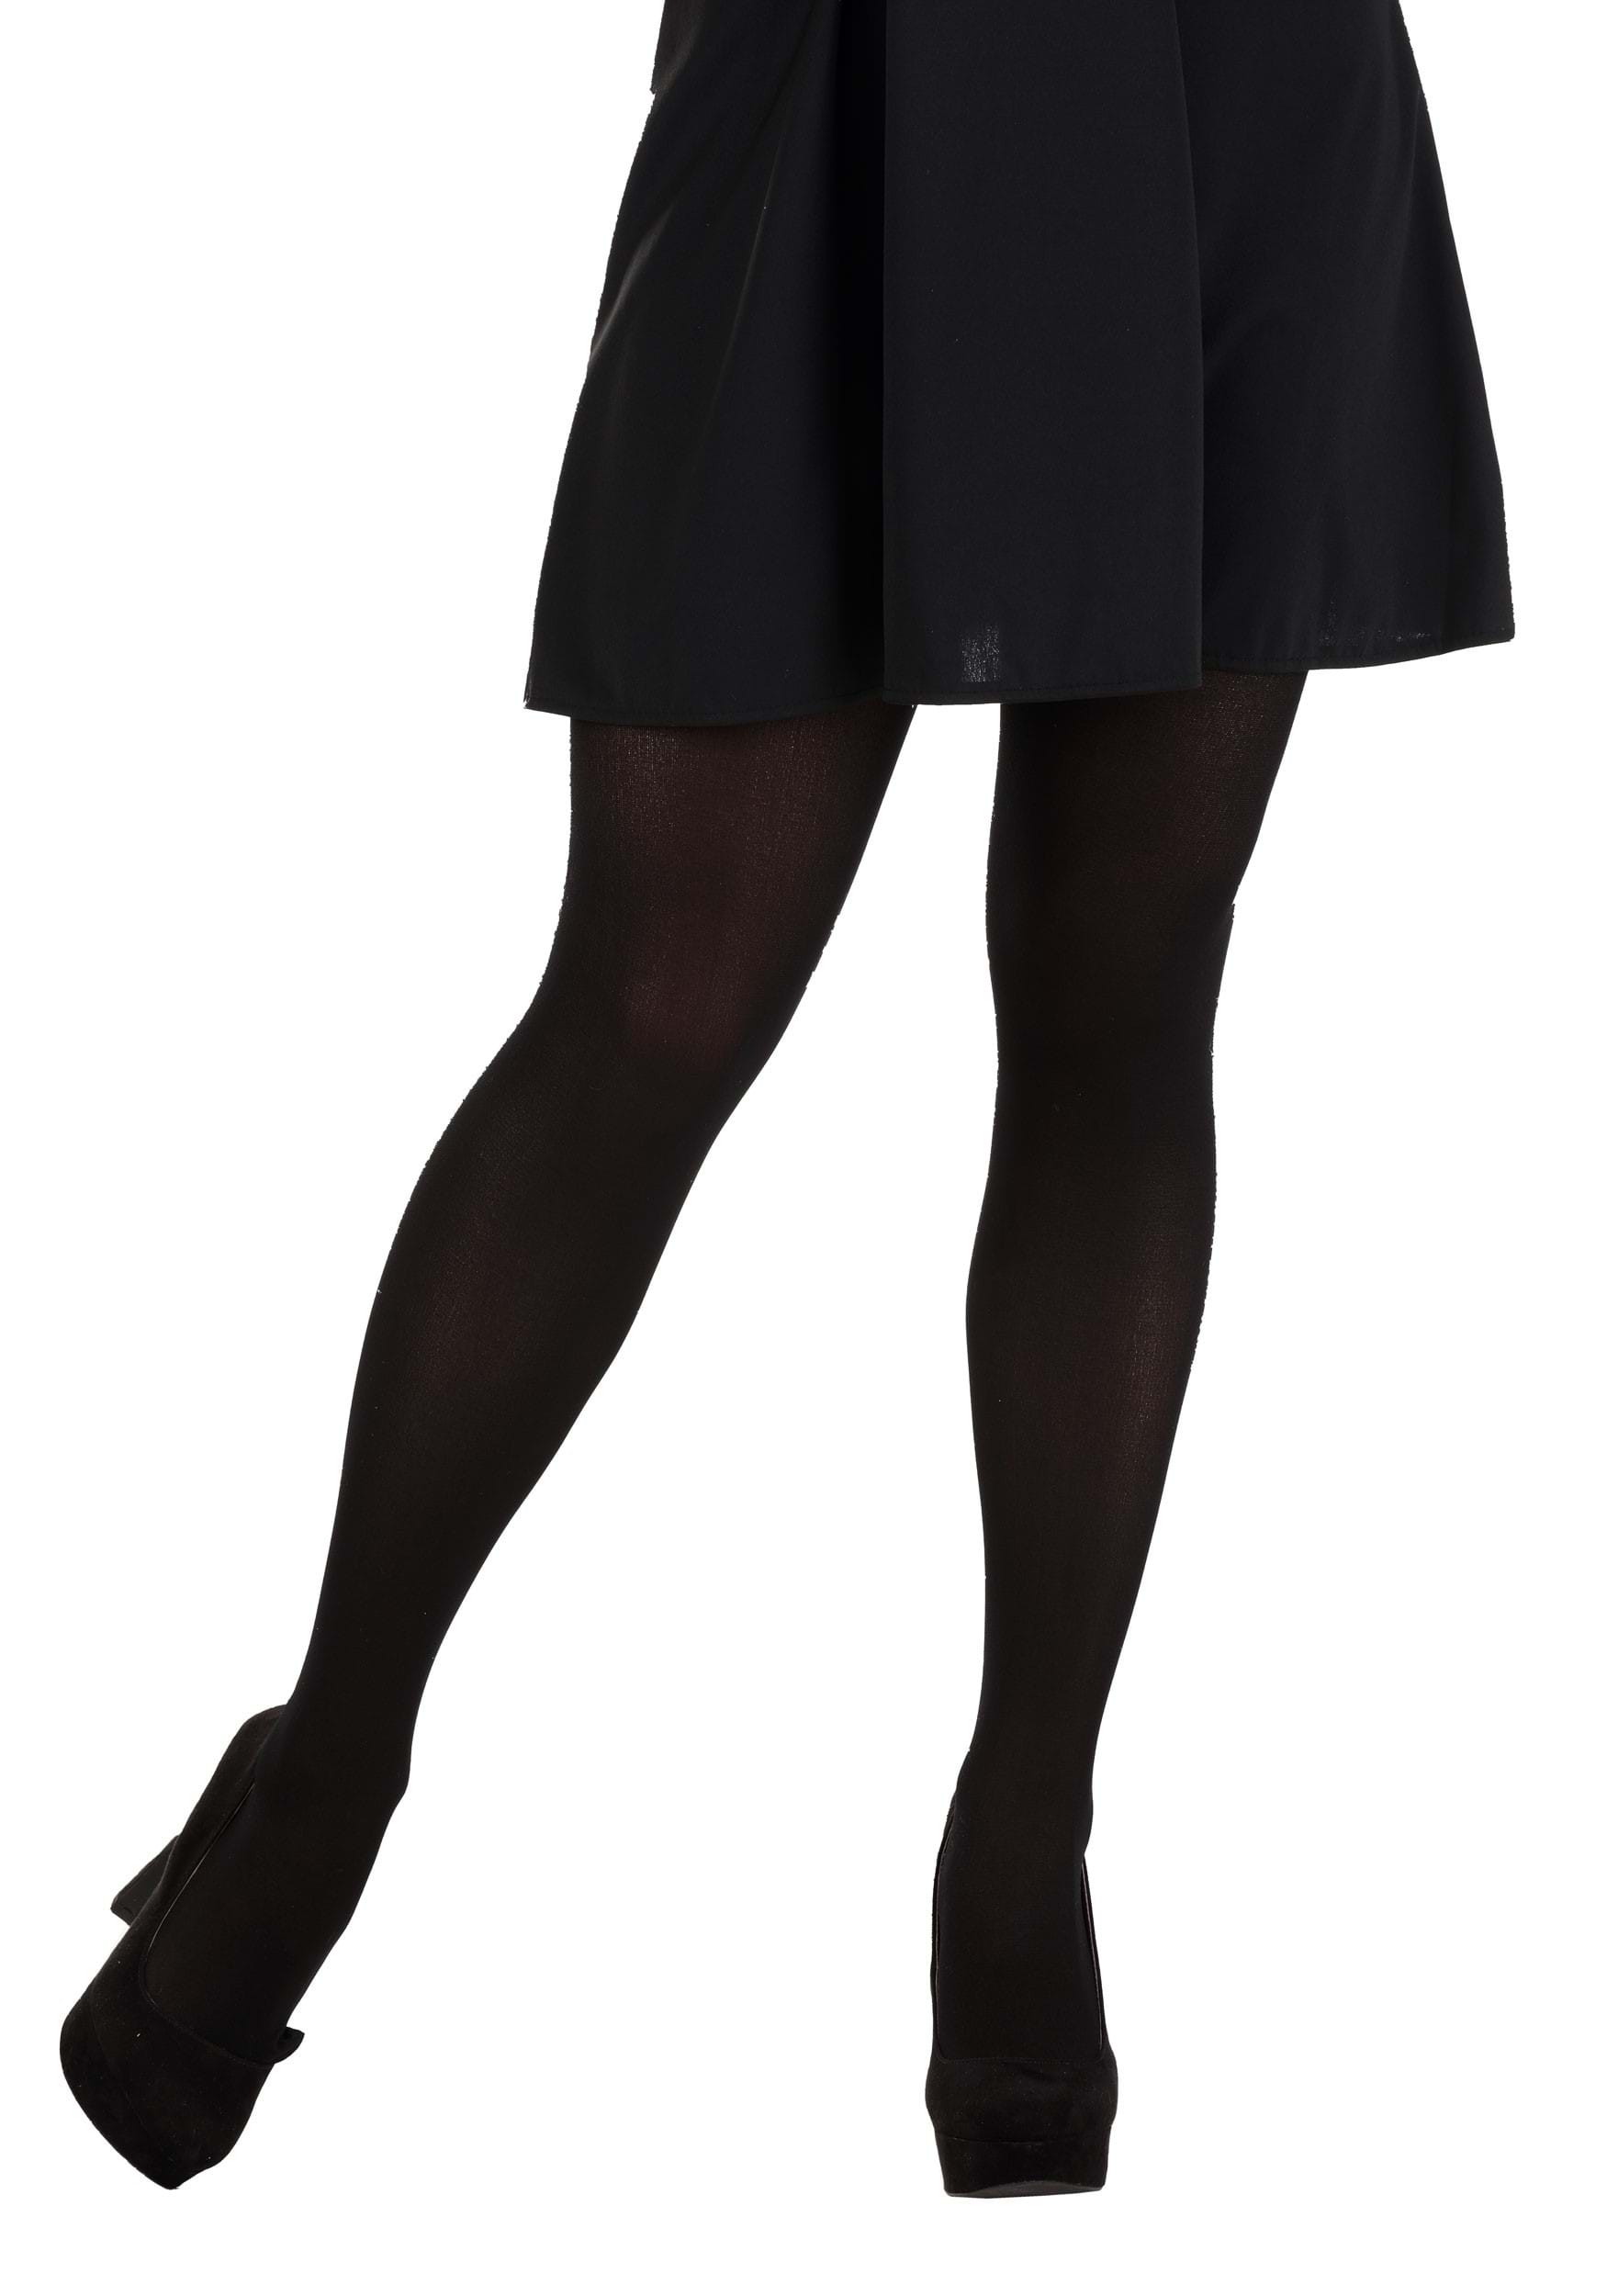 https://images.halloweencostumes.com/products/87759/1-1/opaque-black-tights.jpg